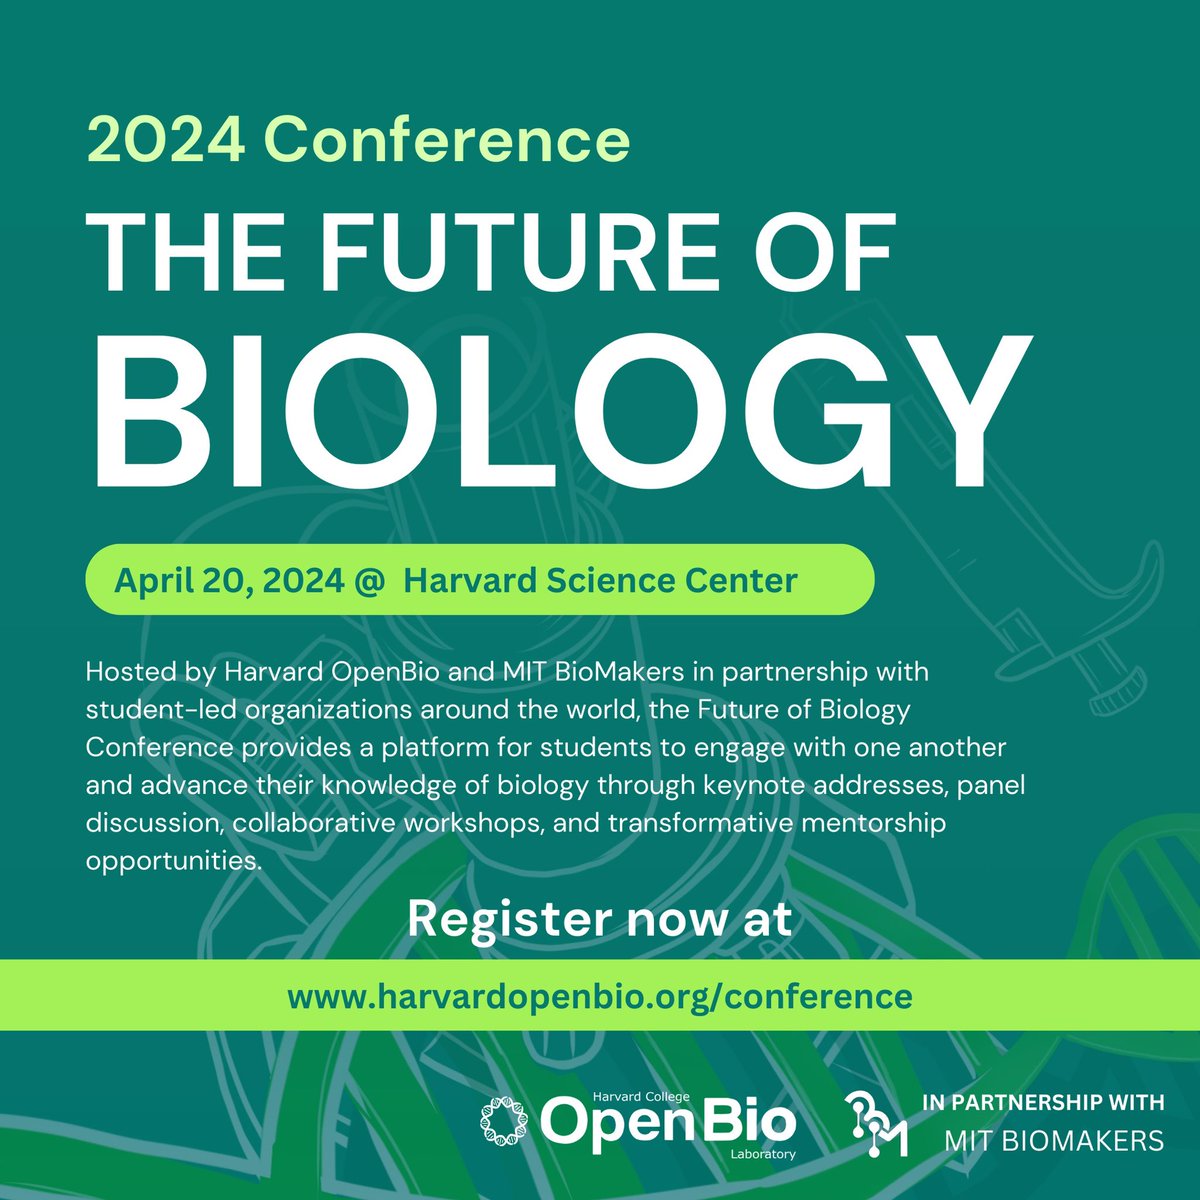 Excited to invite all students to the @harvardopenbio Future of Biology Conference 2024! We are lucky to have an incredible speaker line-up, incl.: 🧬 - @geochurch (@harvardmed) 🌱 - @reshmapshetty (@Ginkgo) 🦾 - @DrRituRaman (@MIT) 🧫 - @jgooten + @omarabudayyeh (@mcgovernmit)